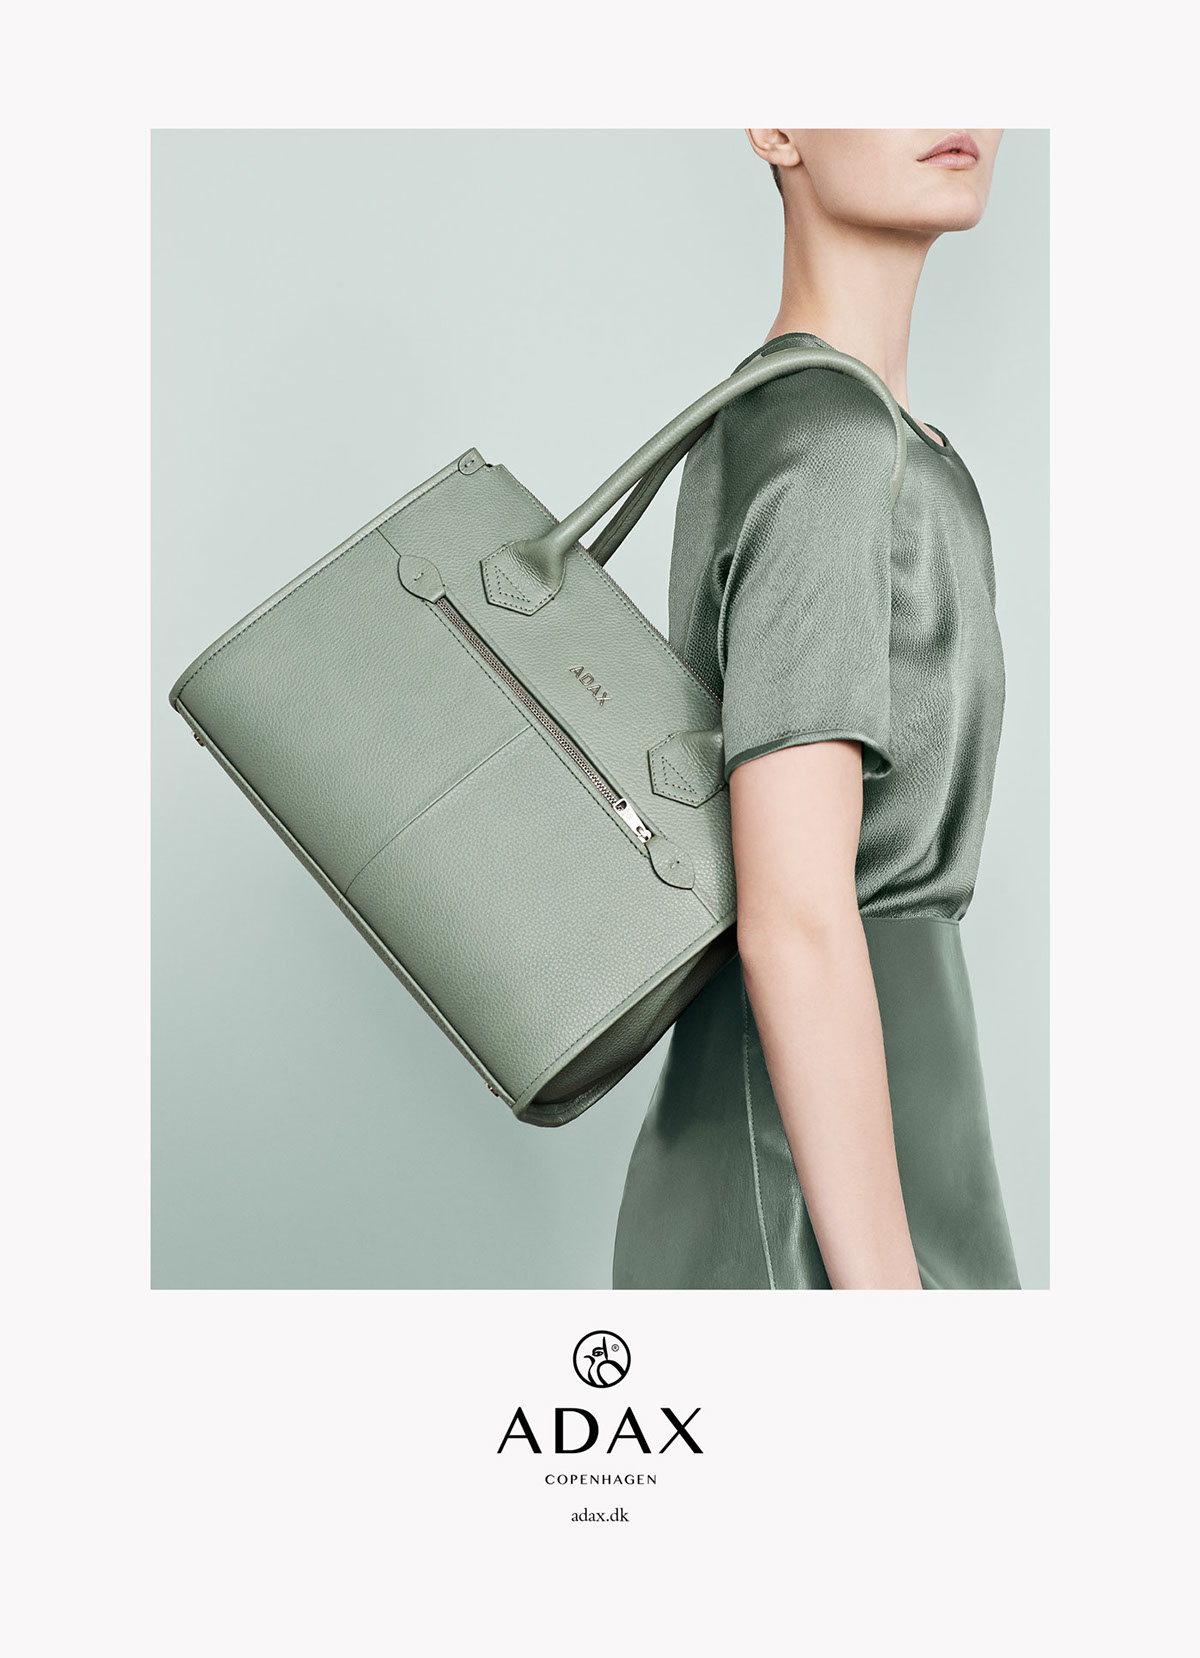 Adax – Campaign Spring/Summer 2015 on Behance